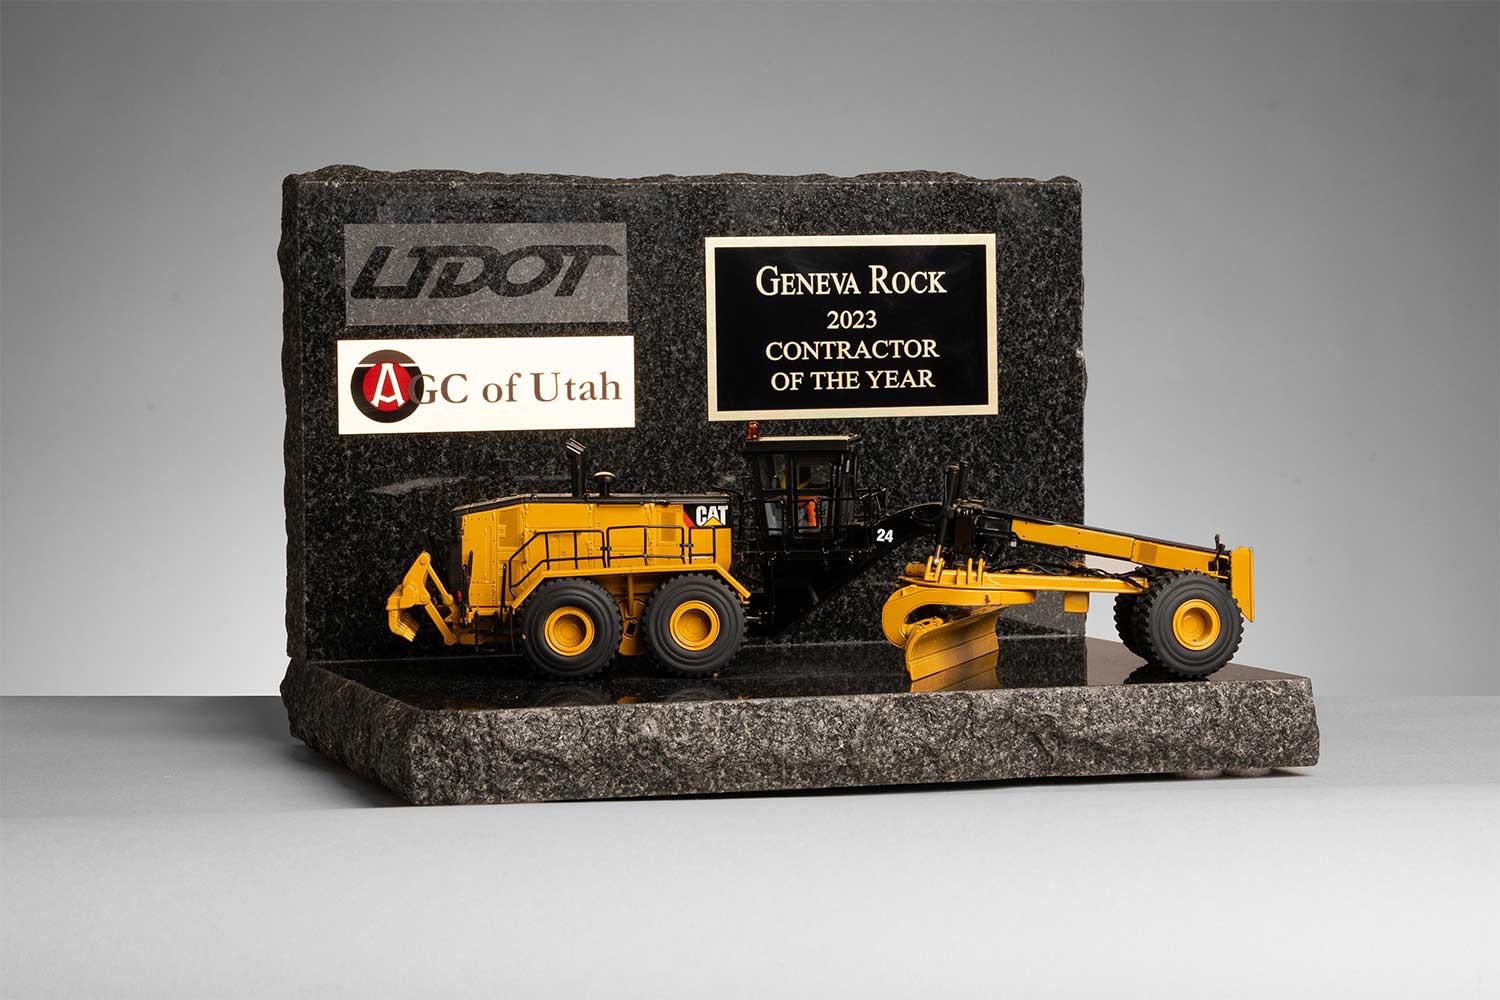 UDOT & AGC of Utah 2023 Contractor of the Year